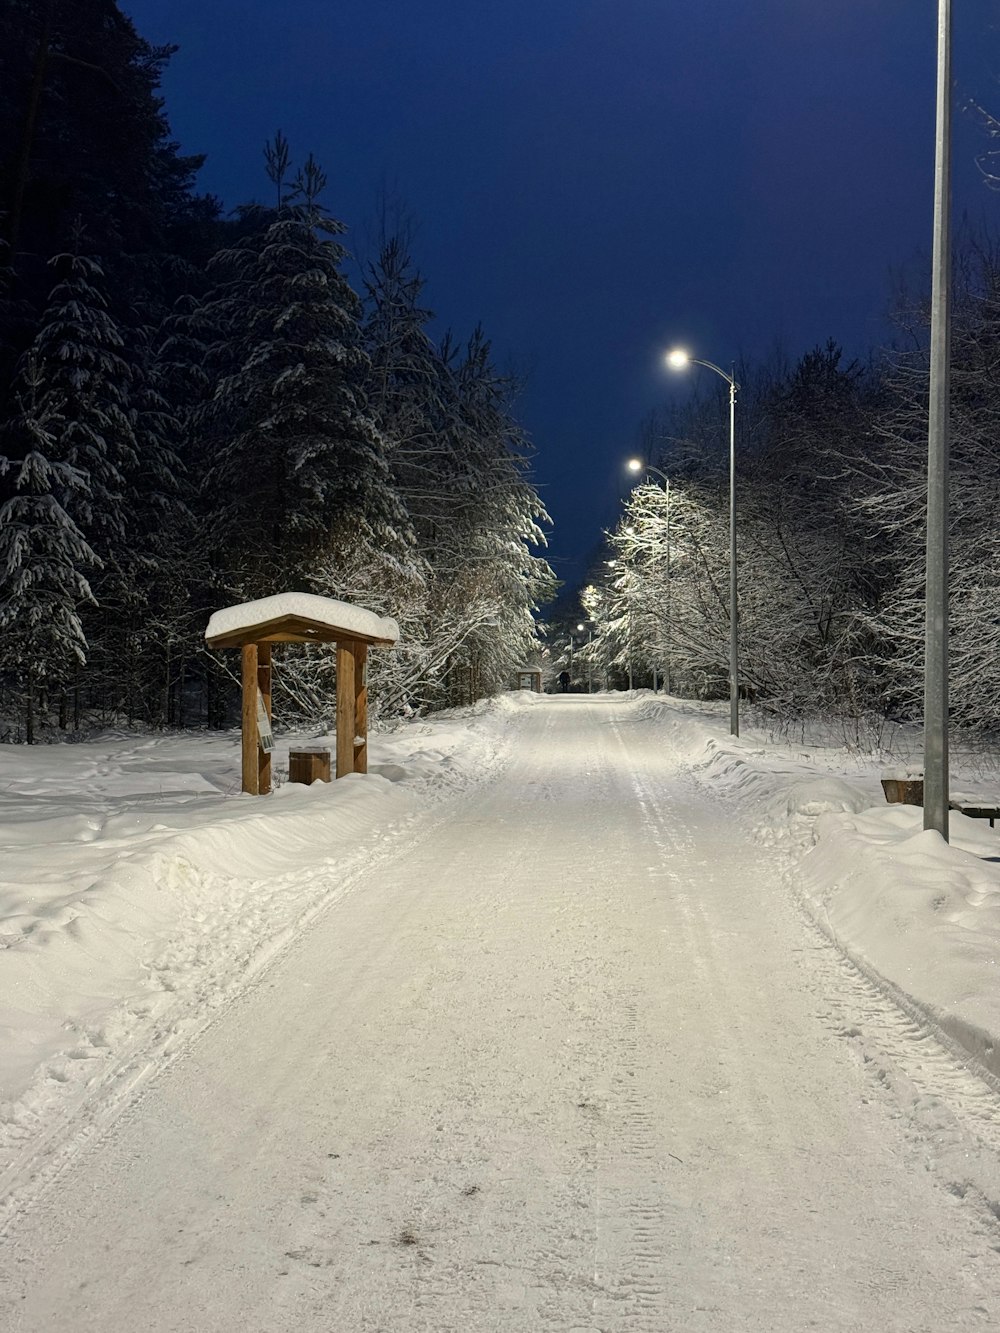 a snowy road with a bench and street lights